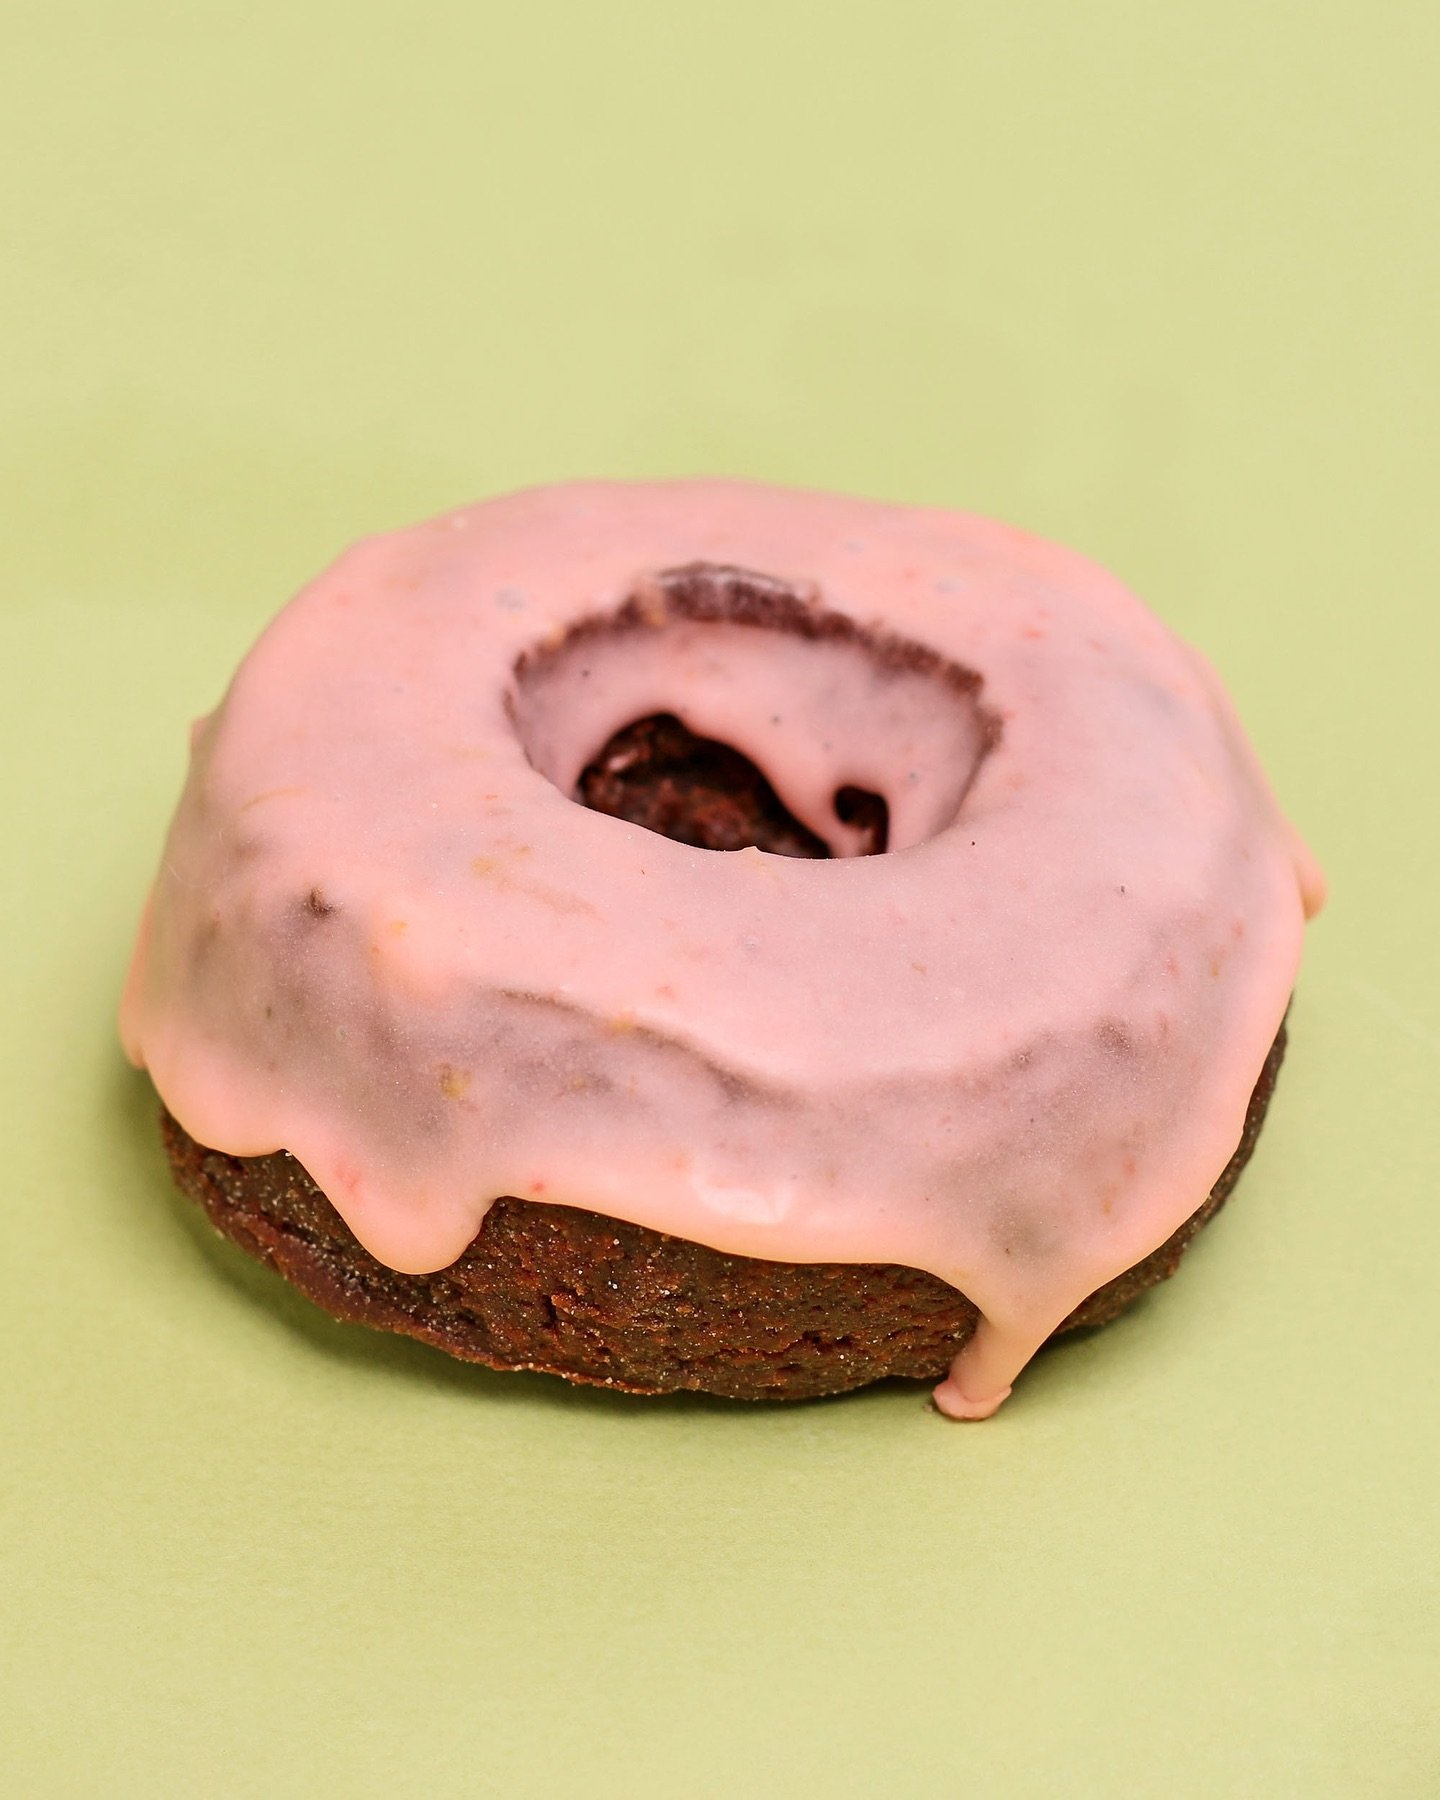 🍓 Chocolate Strawberry 🍓

This is one of our wheat-free options for the month of May! Fresh strawberries folded into our wheat-free chocolate base. Dipped in lemon strawberry glaze.